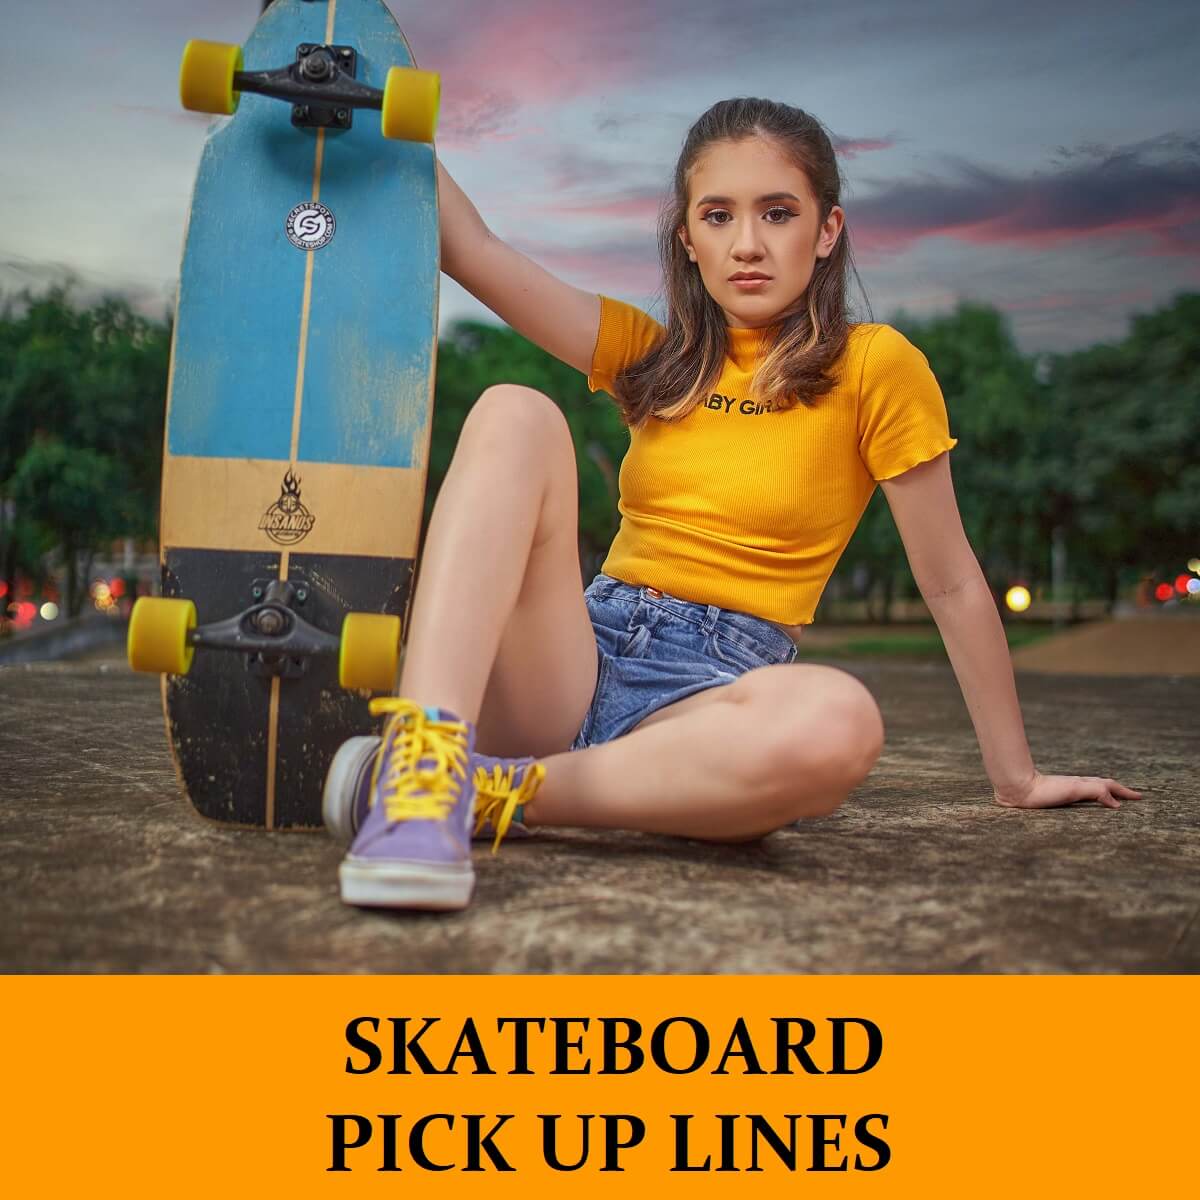 Pick Up Lines About Skateboarding